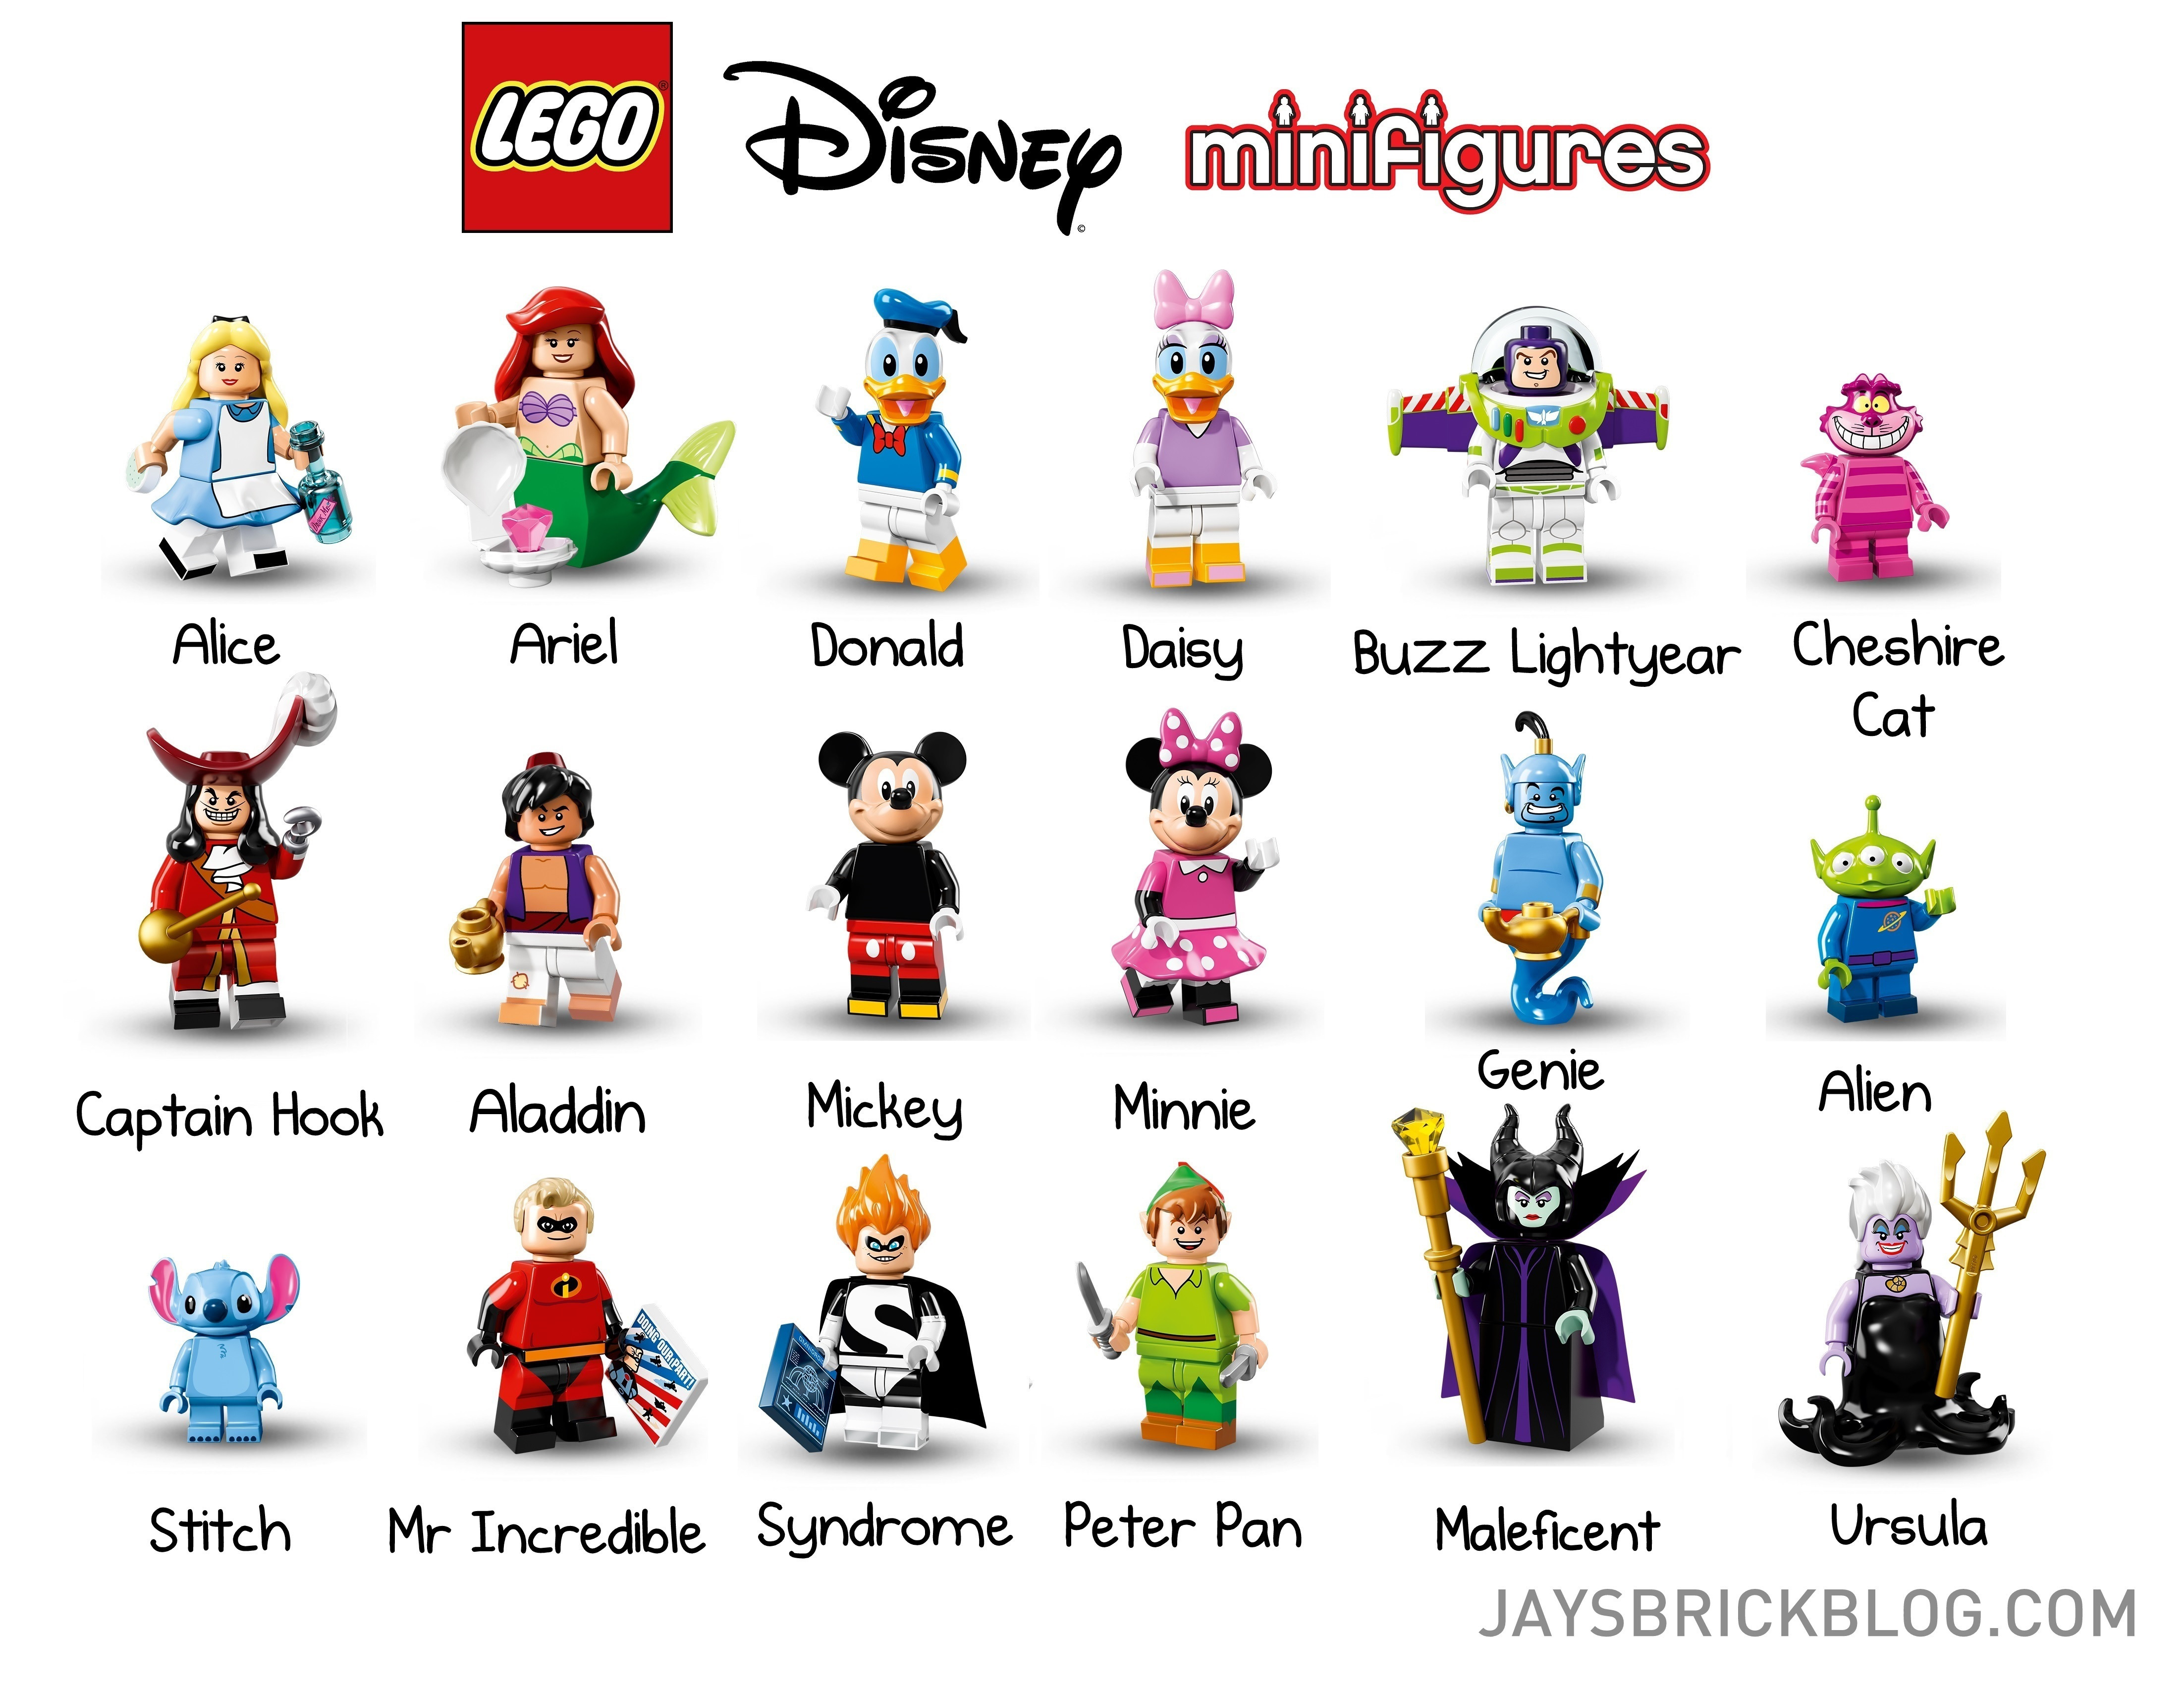 [SOLD OUT] Special Offer: $10 off full sets of LEGO Disney Minifigures